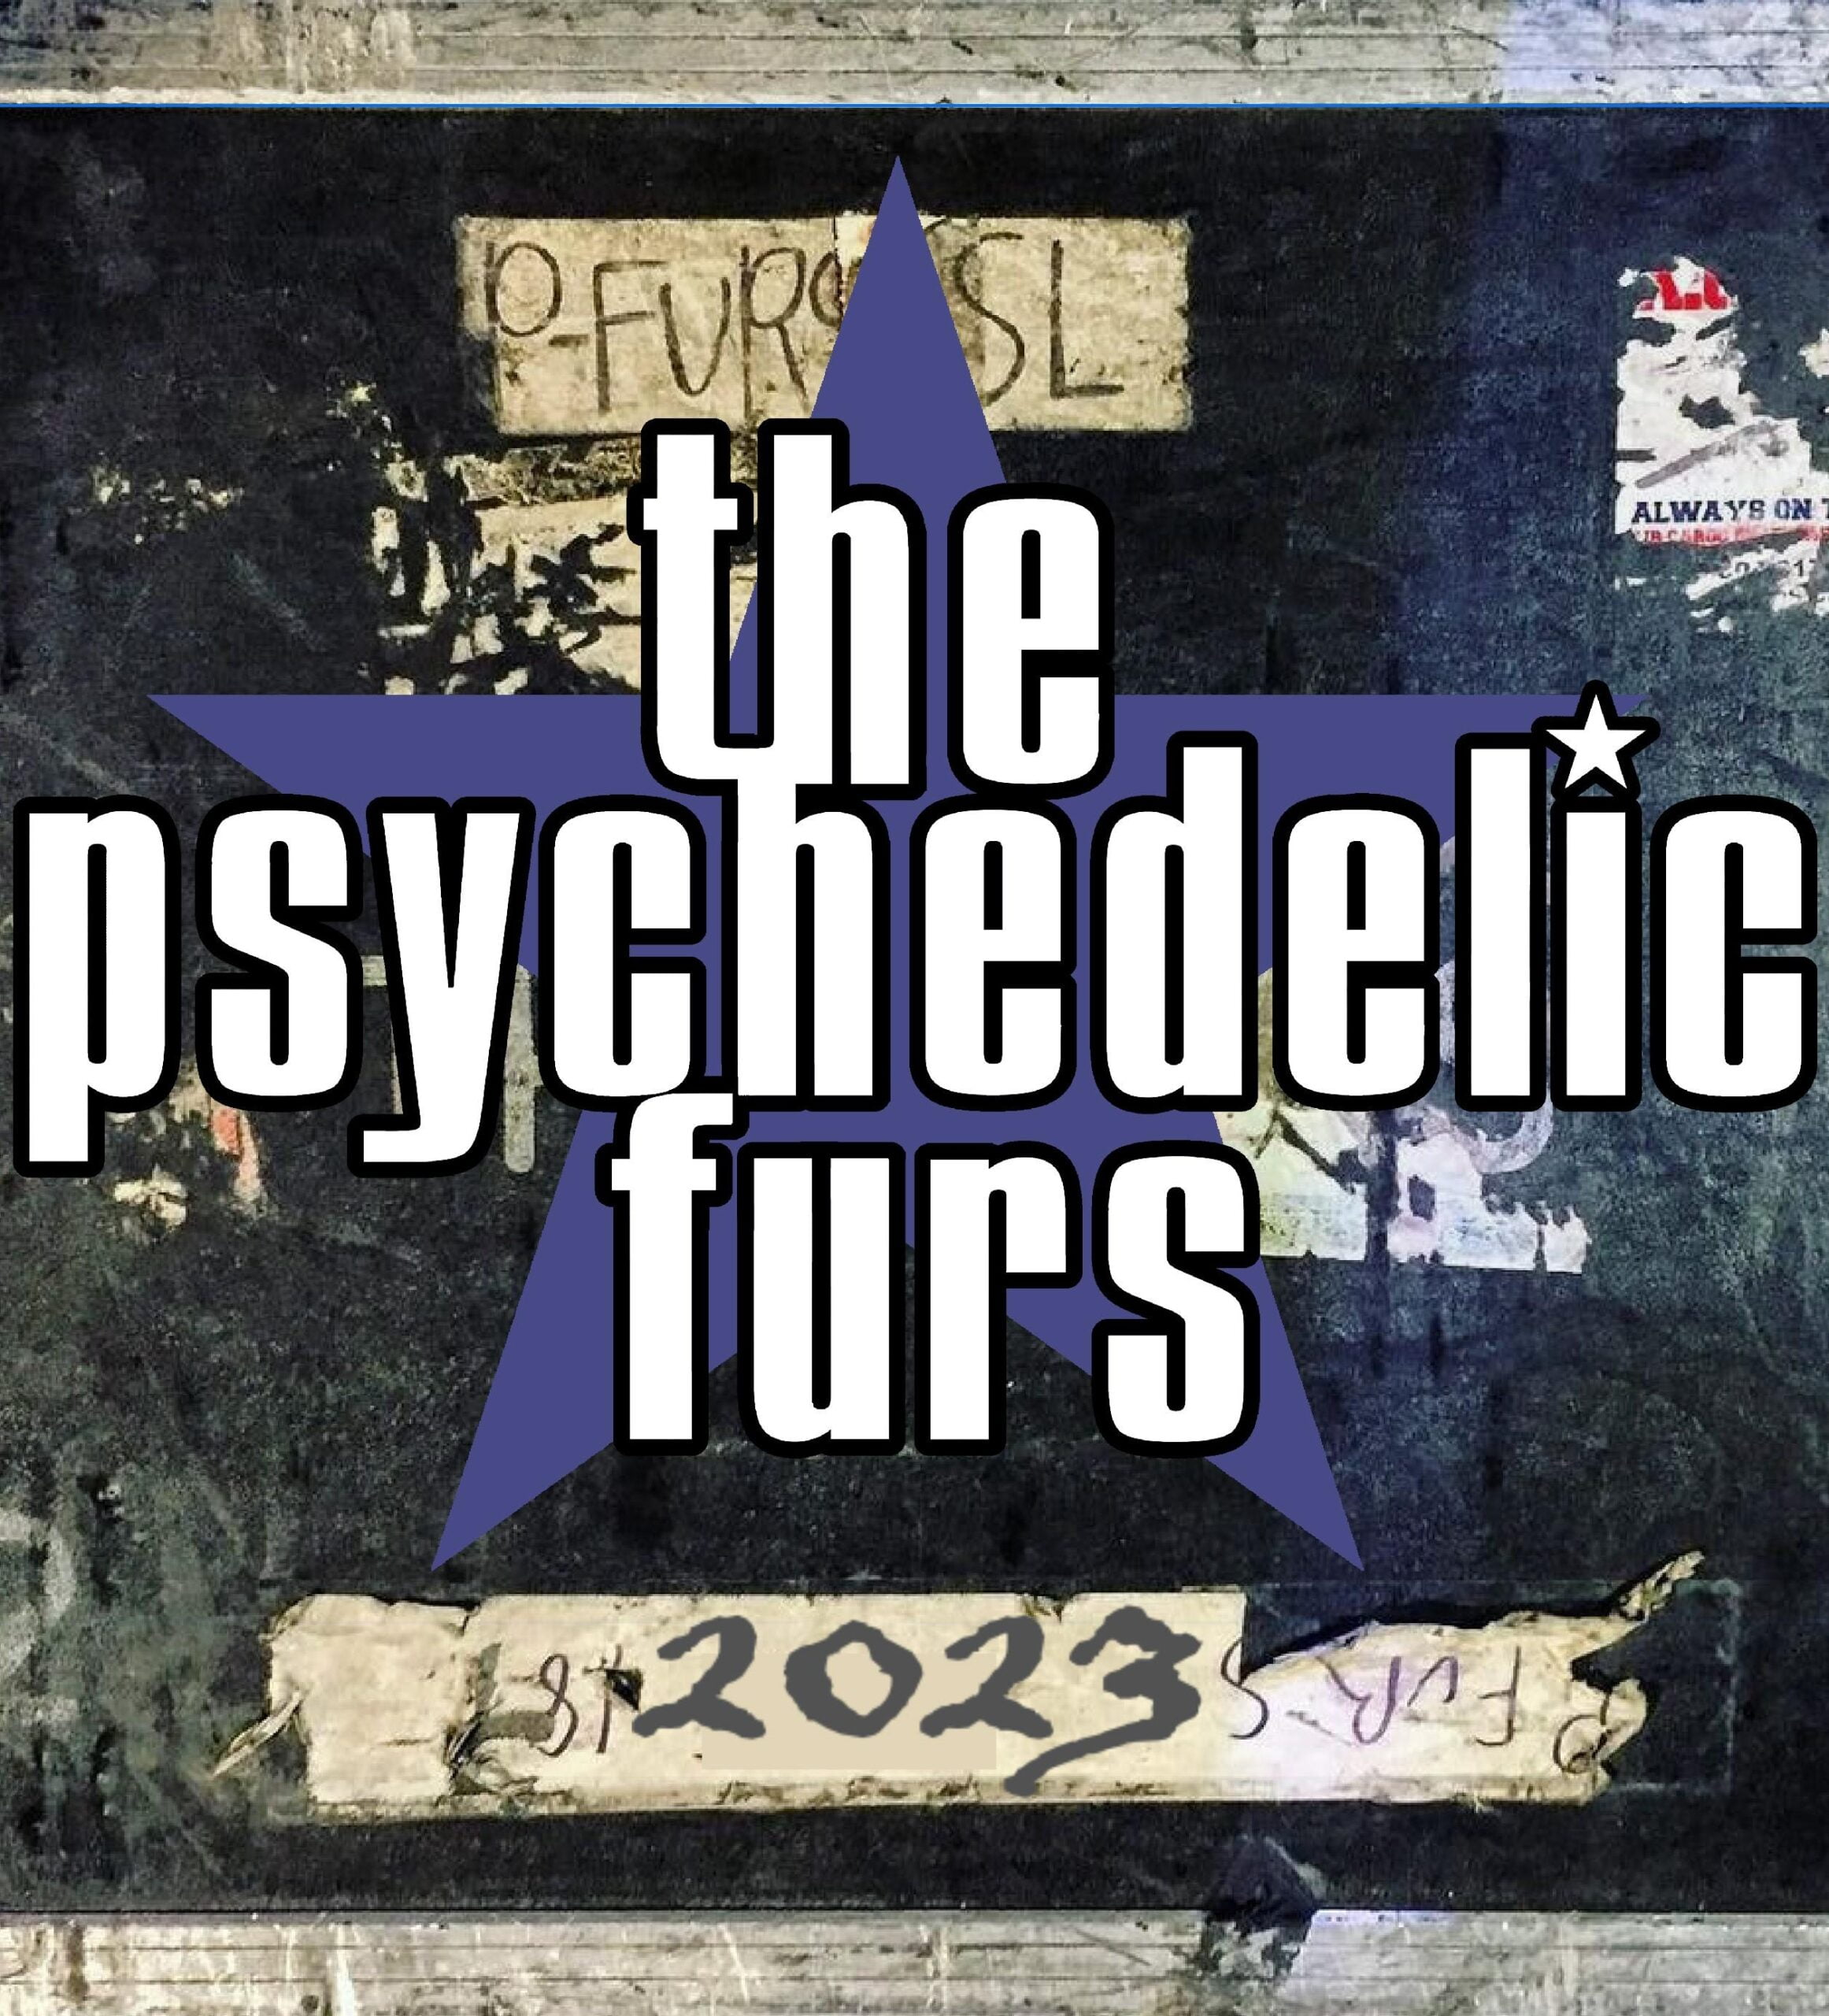 The Psychedelic Furs – 2023 Tour Dates